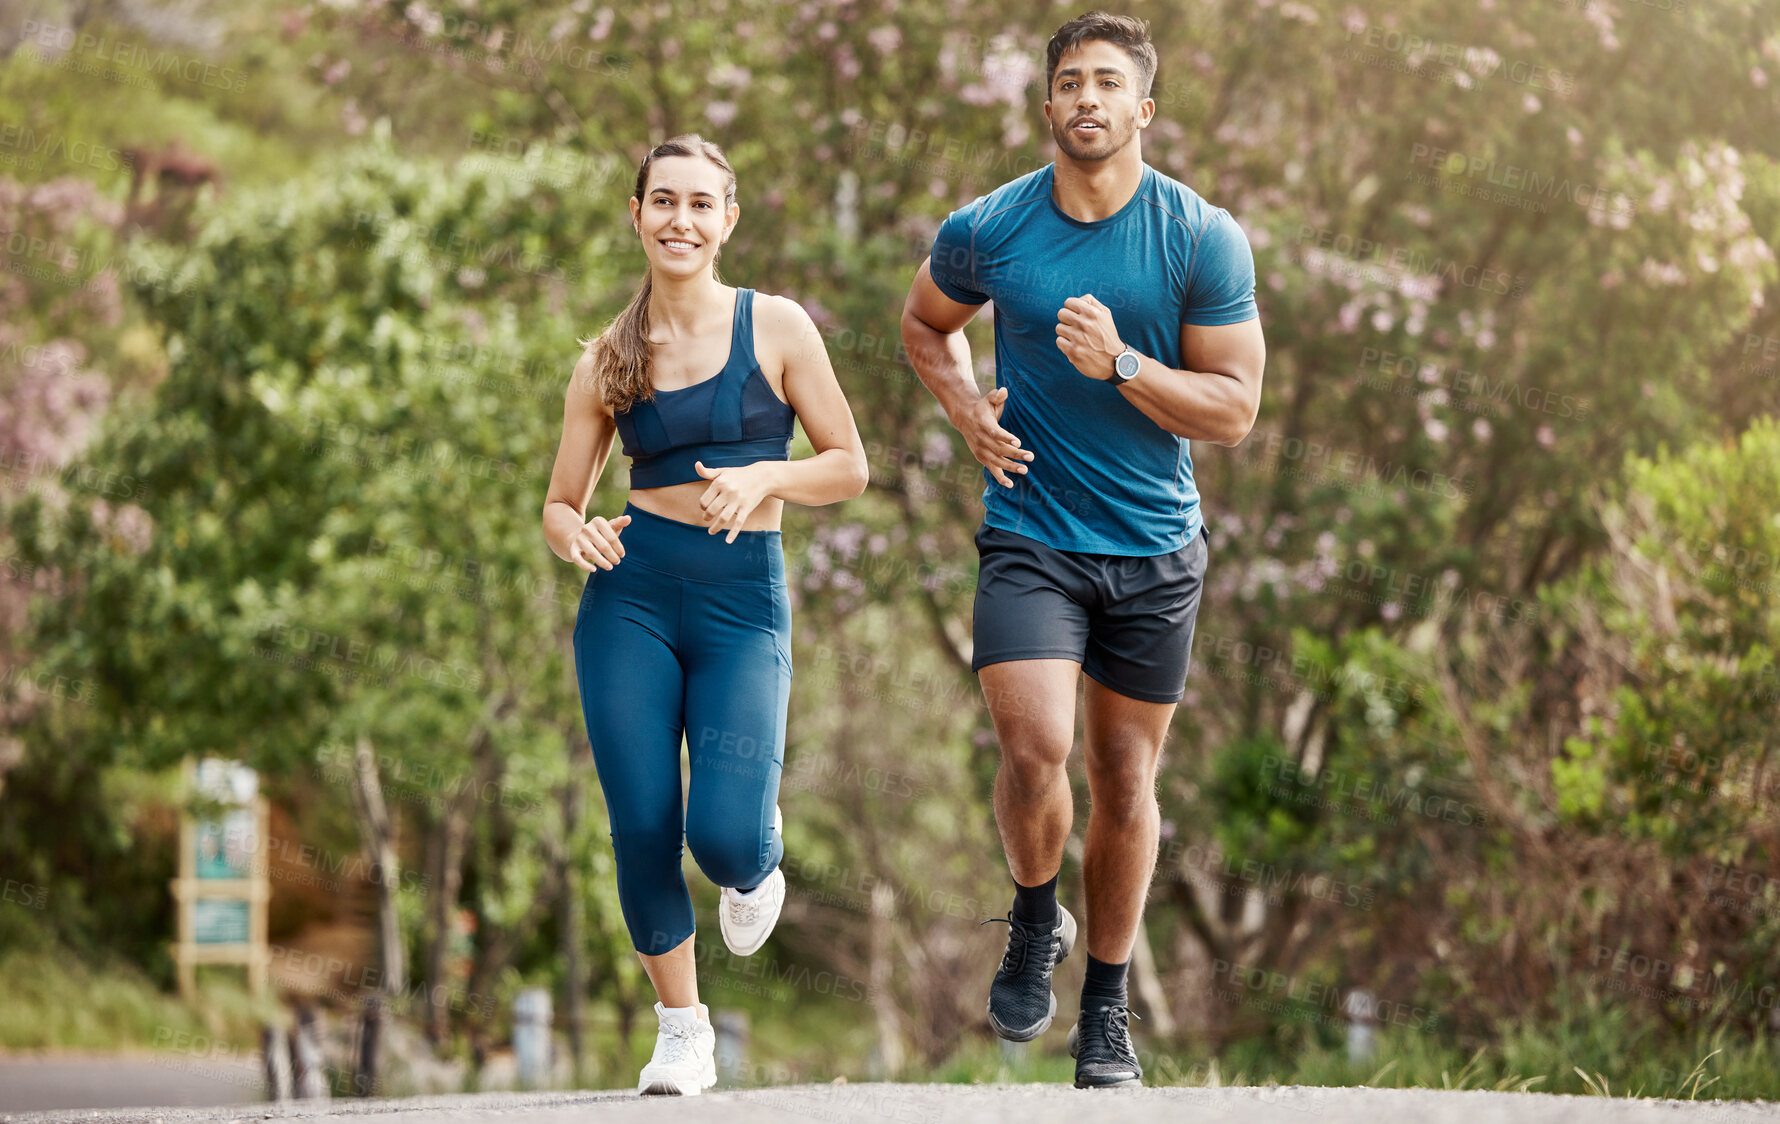 Buy stock photo Fit young man and woman running together outdoors. Interracial couple and motivated athletes doing cardio workout while exercising for better health and fitness at the park